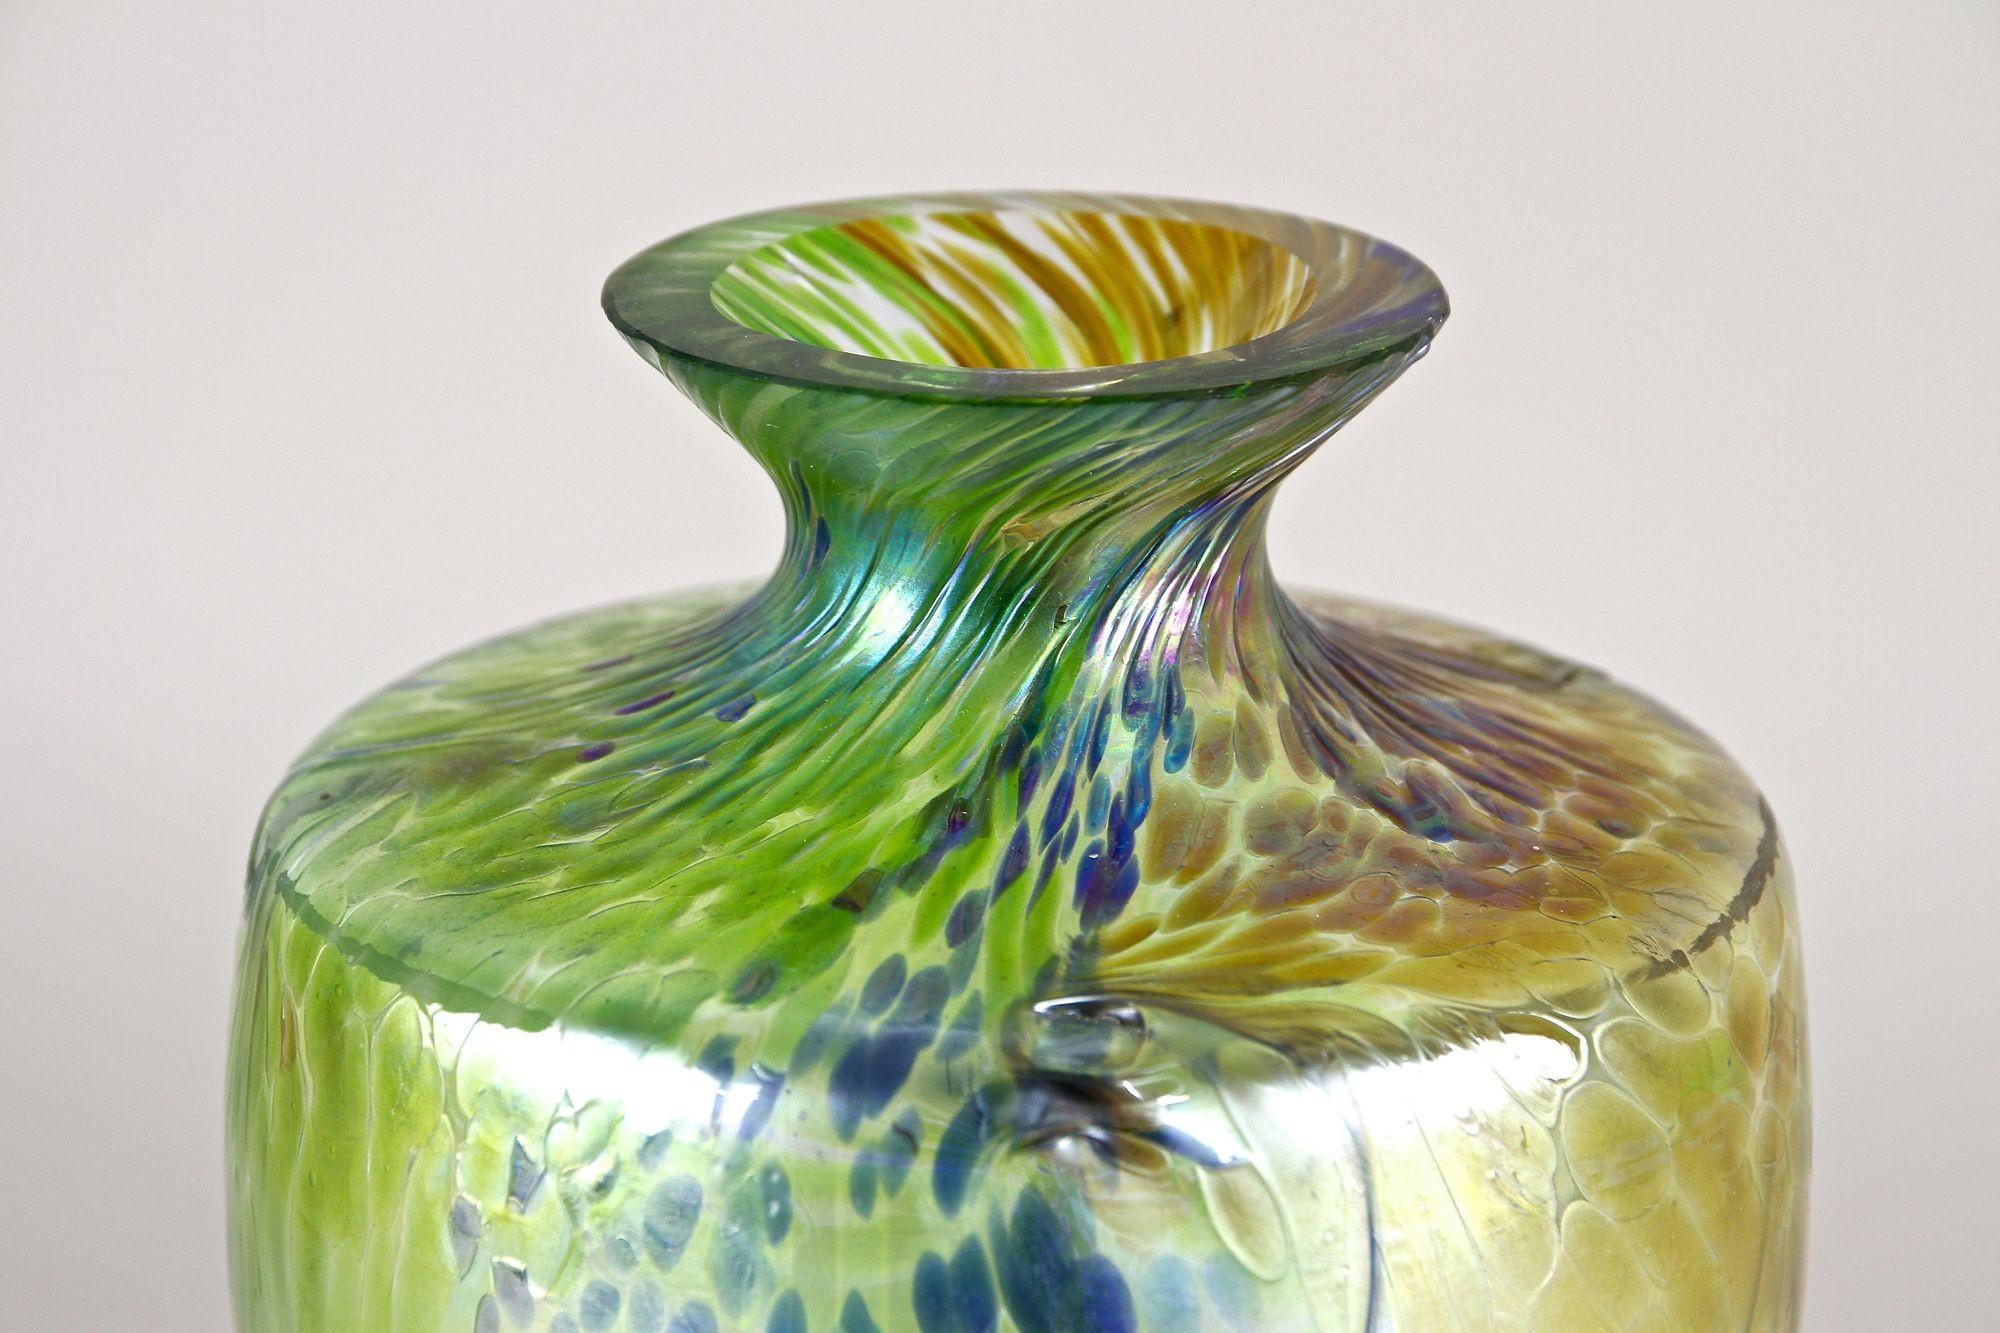 Iridescent Art Nouveau Glass Vase Attributed To Fritz Heckert, Bohemia ca. 1905 For Sale 3